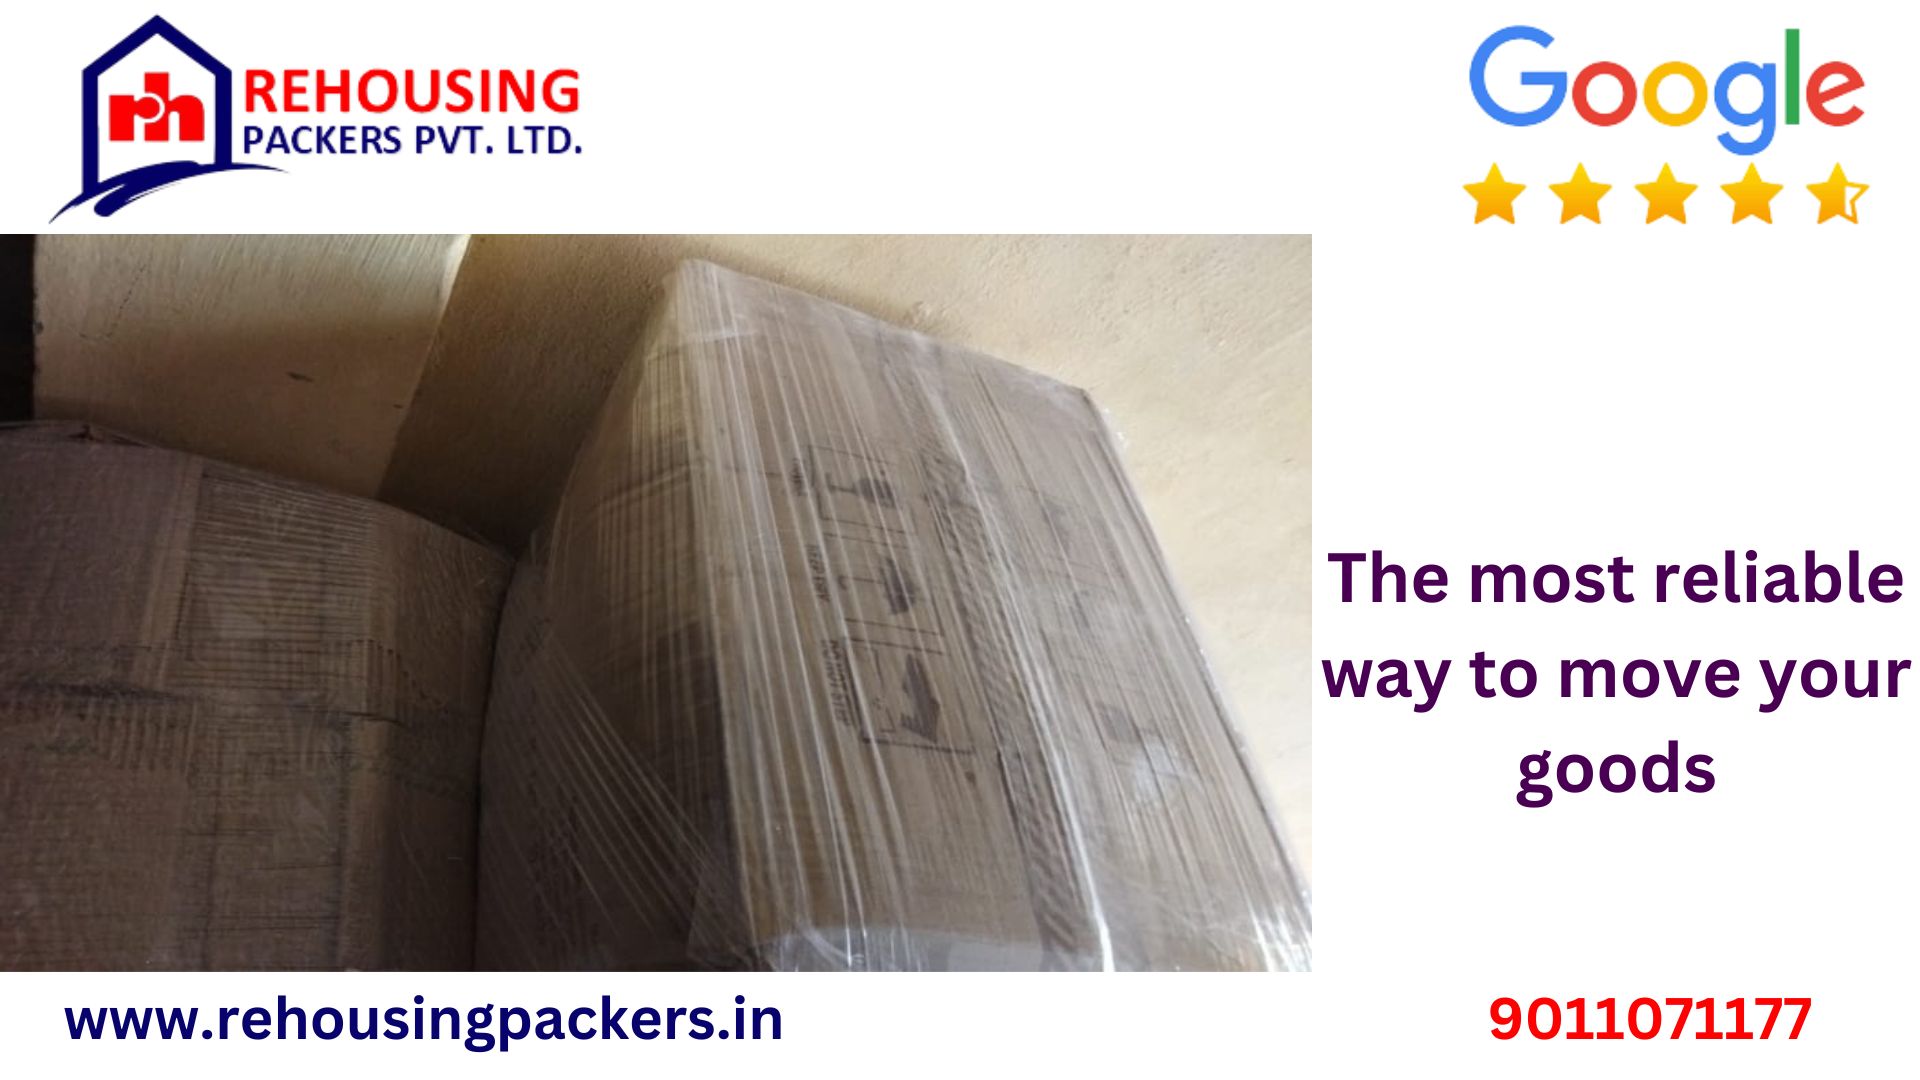 our courier services from Delhi to Chandigarh